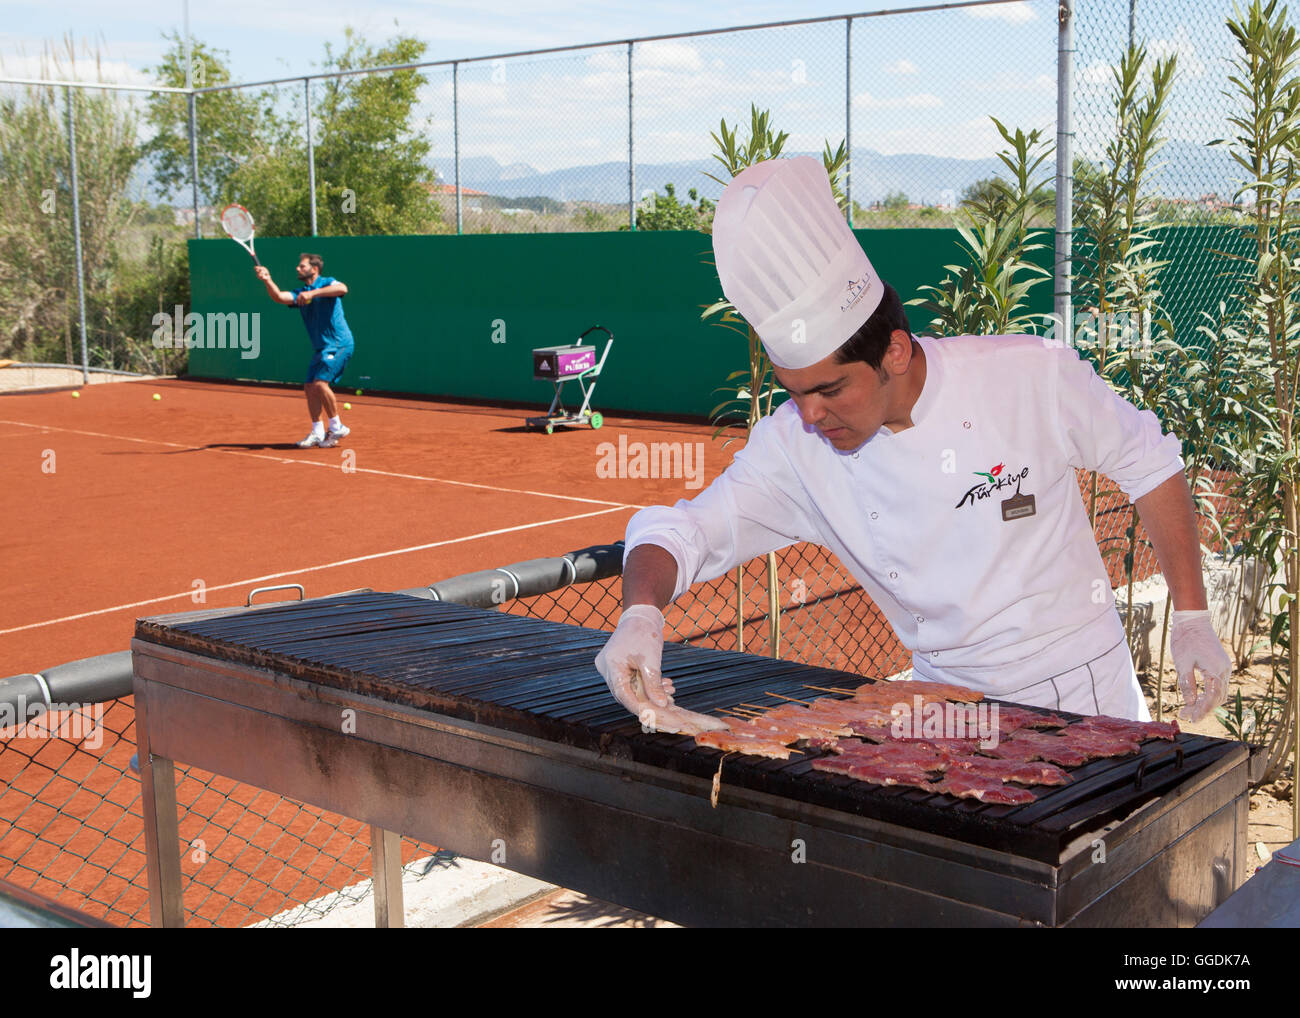 Cook putting meat on BBQ grill next to tennis court Stock Photo - Alamy